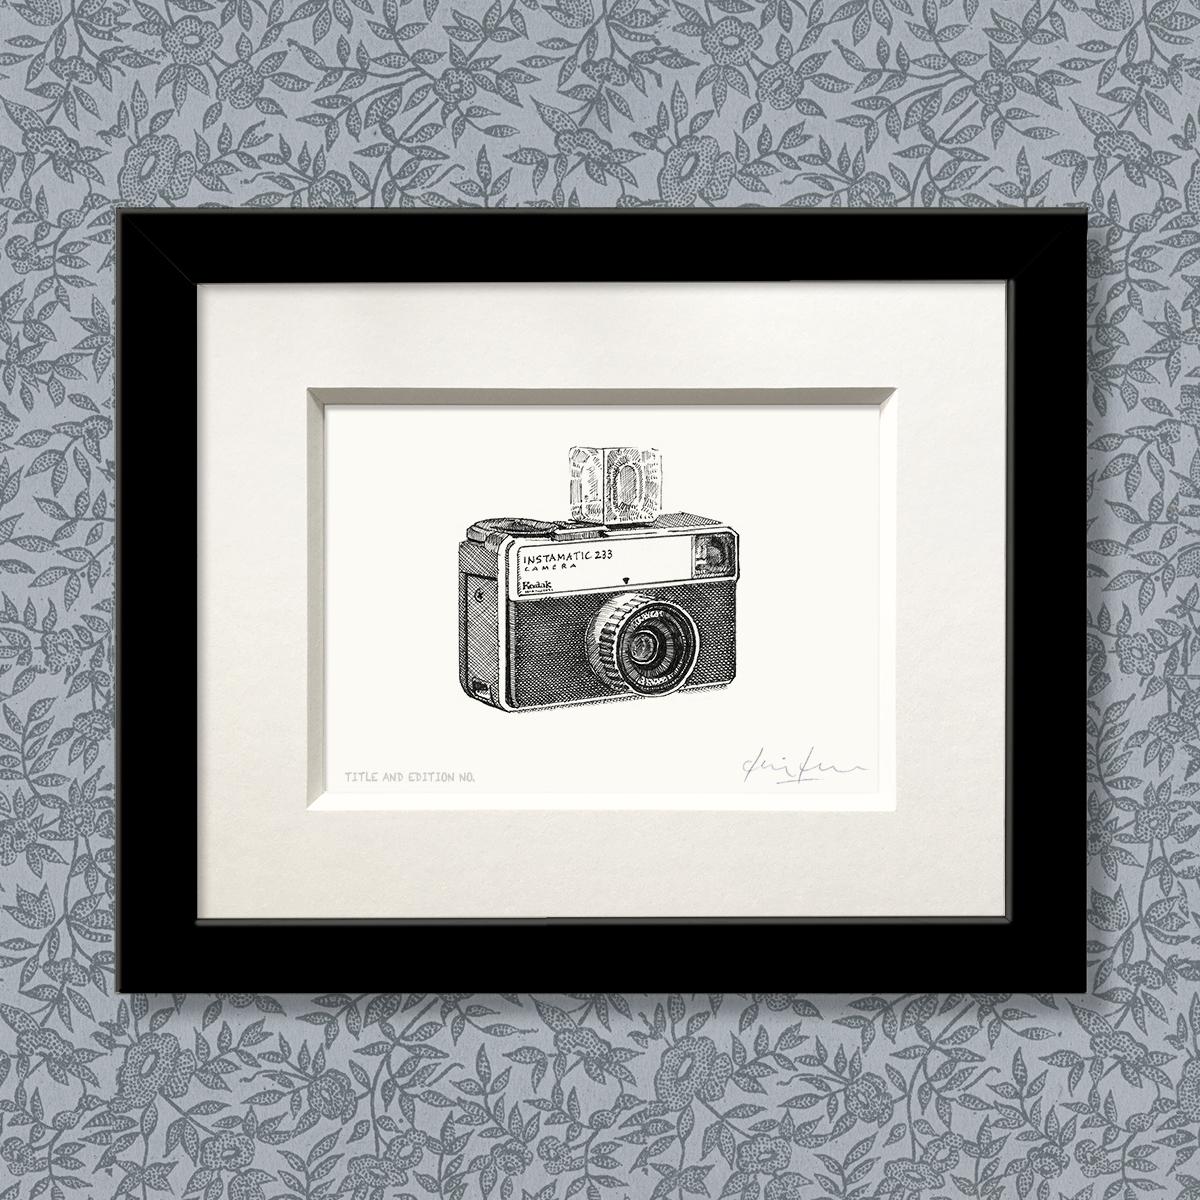 Limited edition print from pen and ink drawing of an old Instamatic camera in a black frame